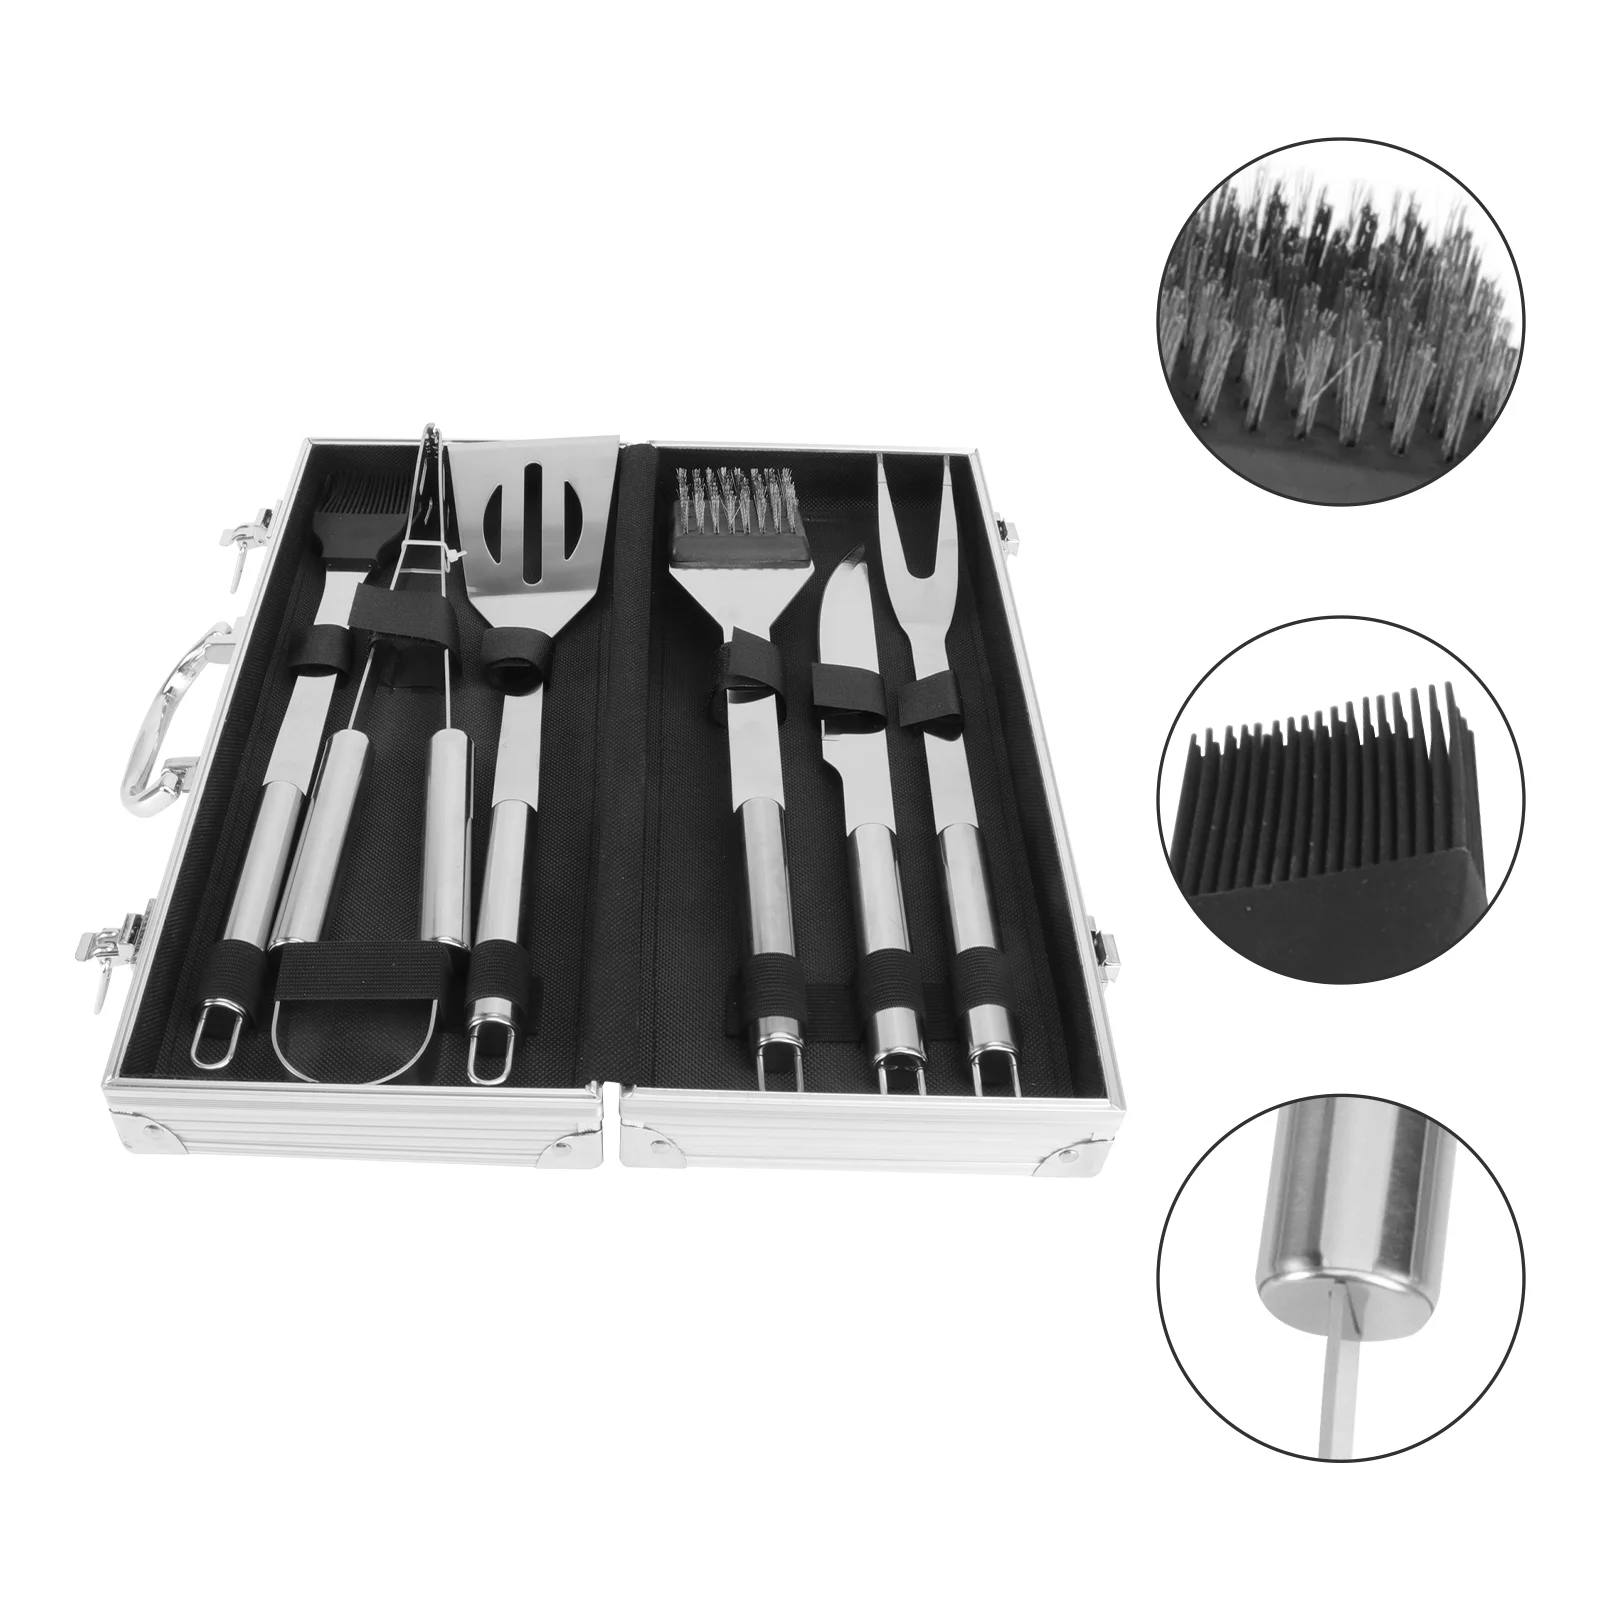 

Outdoor Portable Barbecue 6-piece Set Grill Cookware Utensils with Aluminium Case BBQ Tools Combination Kitchen Stand